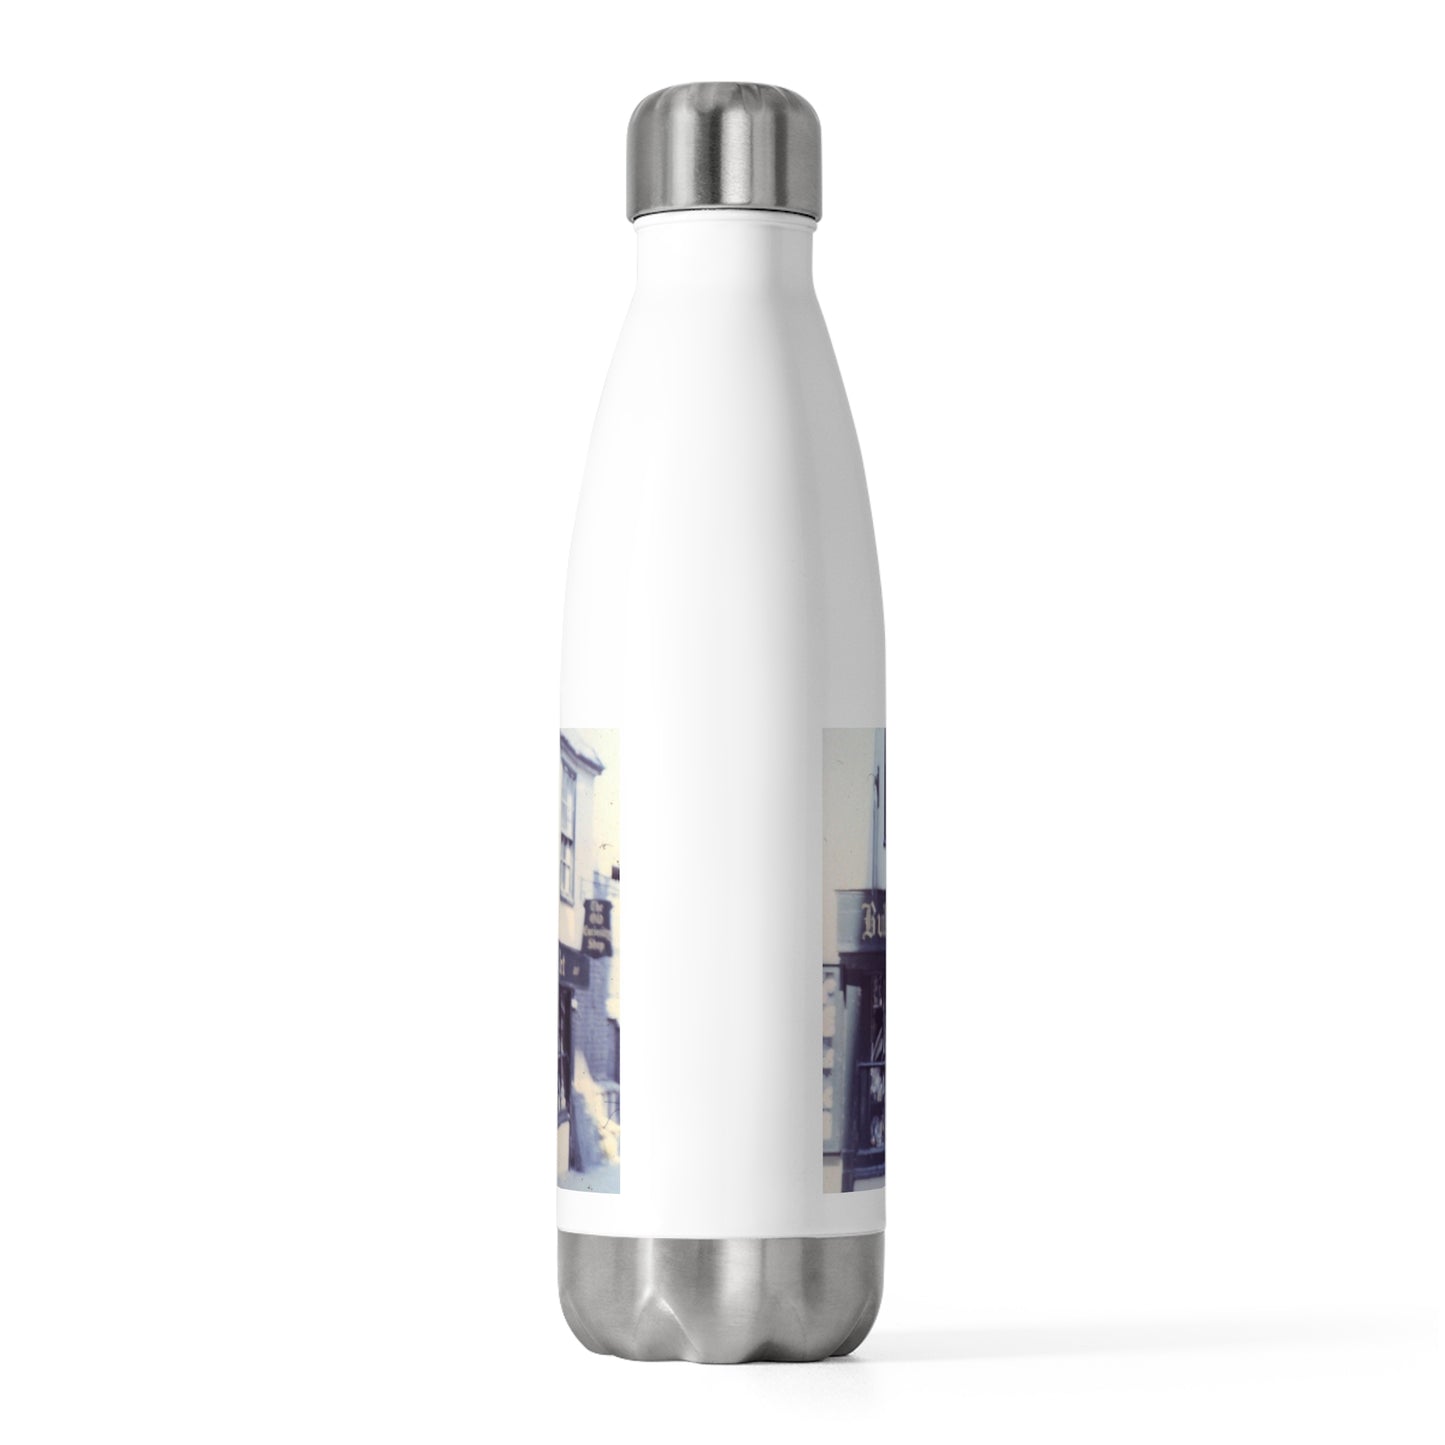 Europe 1967 No 8 20oz Insulated Bottle